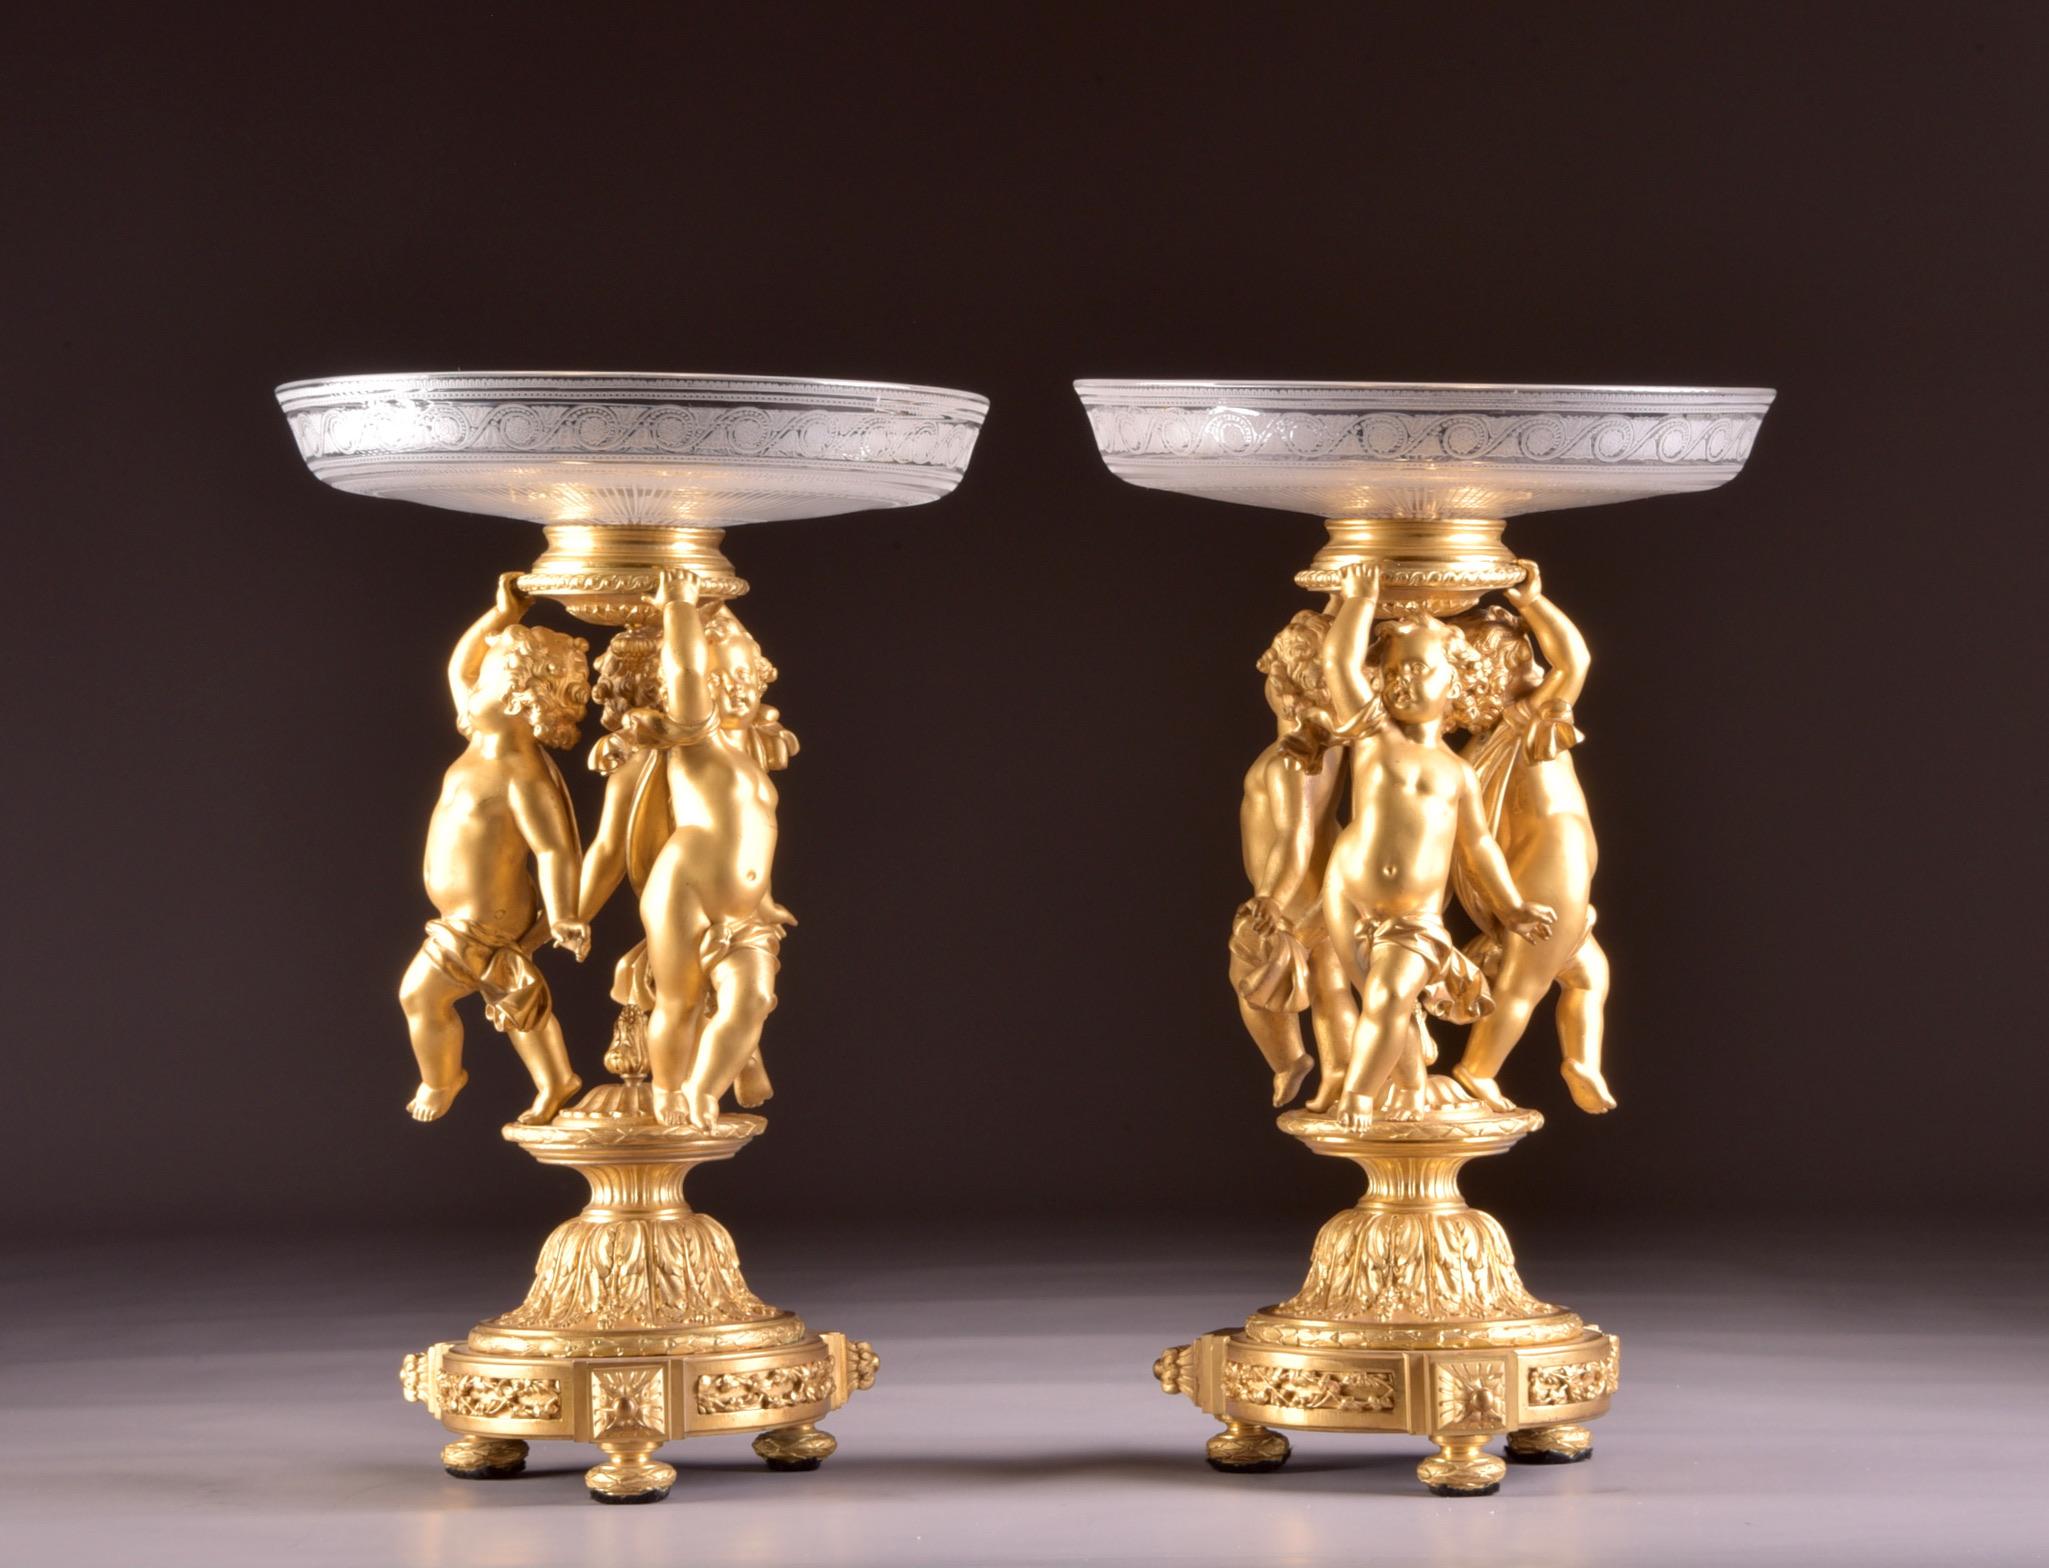 An Exceptional pair of 19th century Napoleon III gilt bronze and crystal, 9 light candelabra. This special set has two functions and can be used as a candlestick as well as a beautiful centerpiece / milieu de table.
Each candlestick is richly